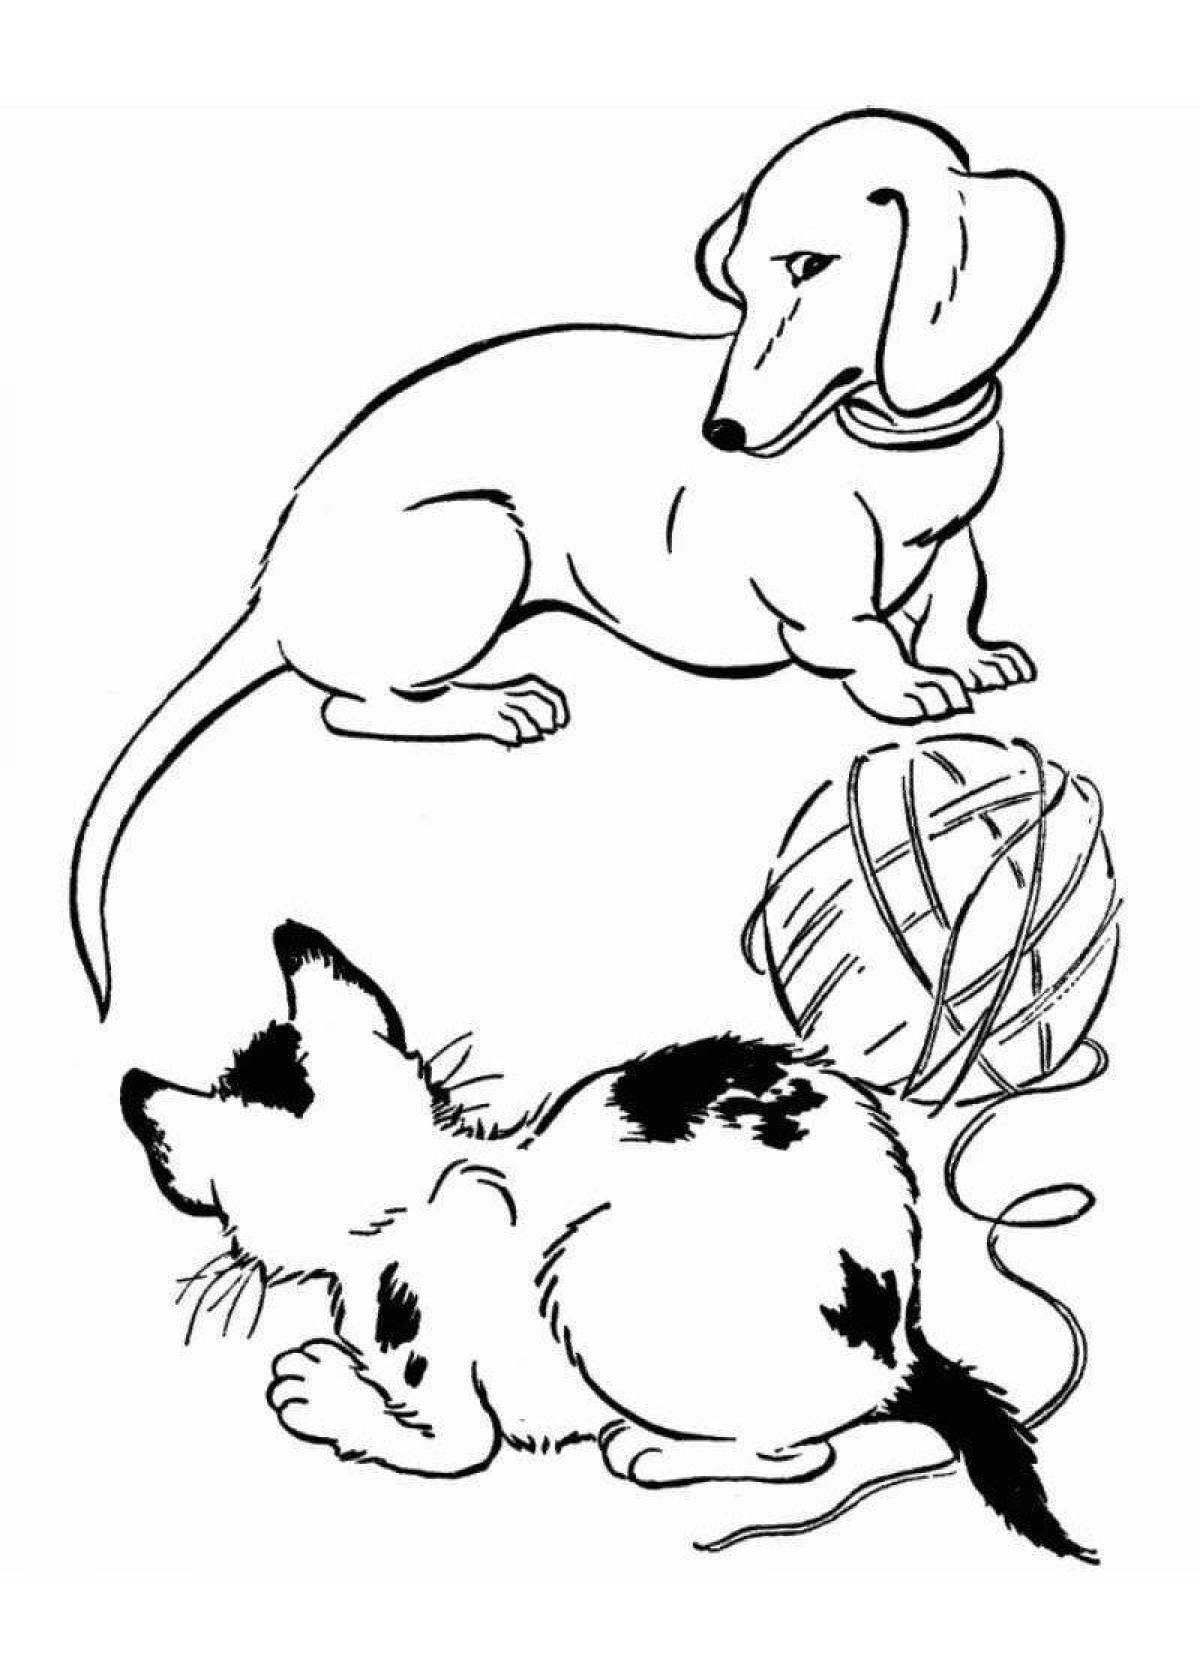 Colorful coloring pages animals cats and dogs